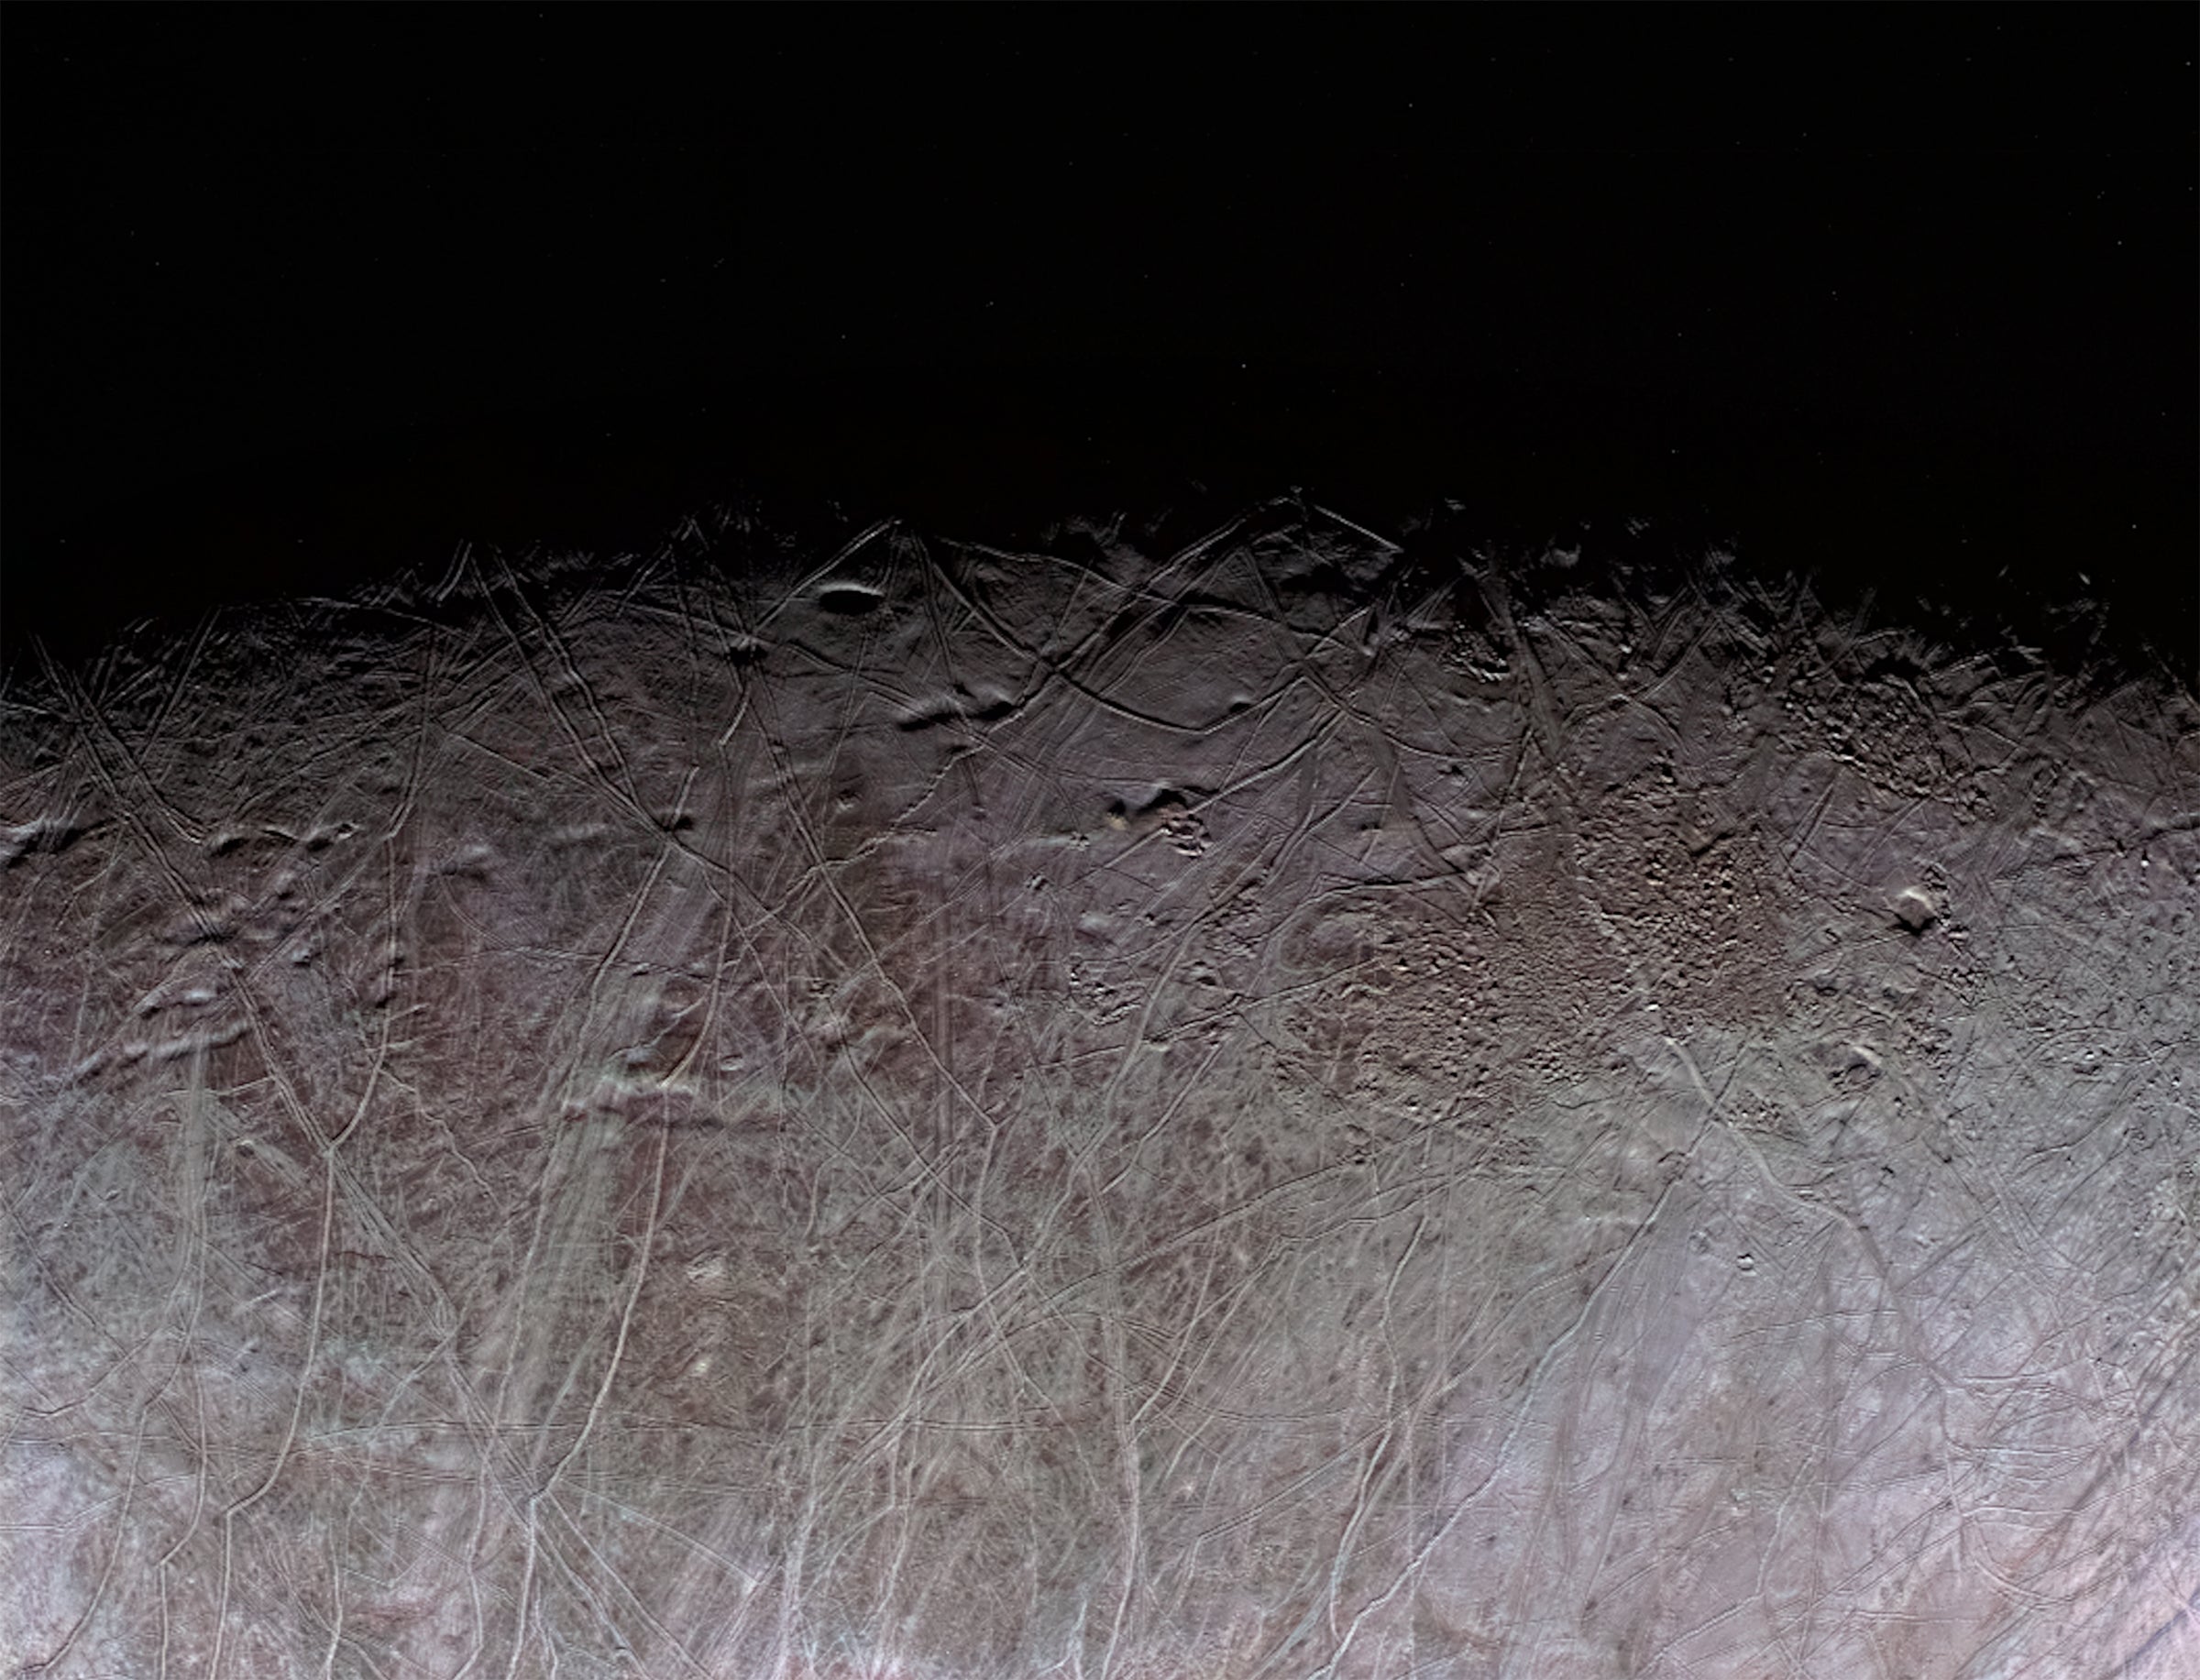 Shadows along the terminator, or day-night boundary, help to reveal some of Europa’s distinctive surface features, such as fractures and pits, and indicate that the moon is geologically active.